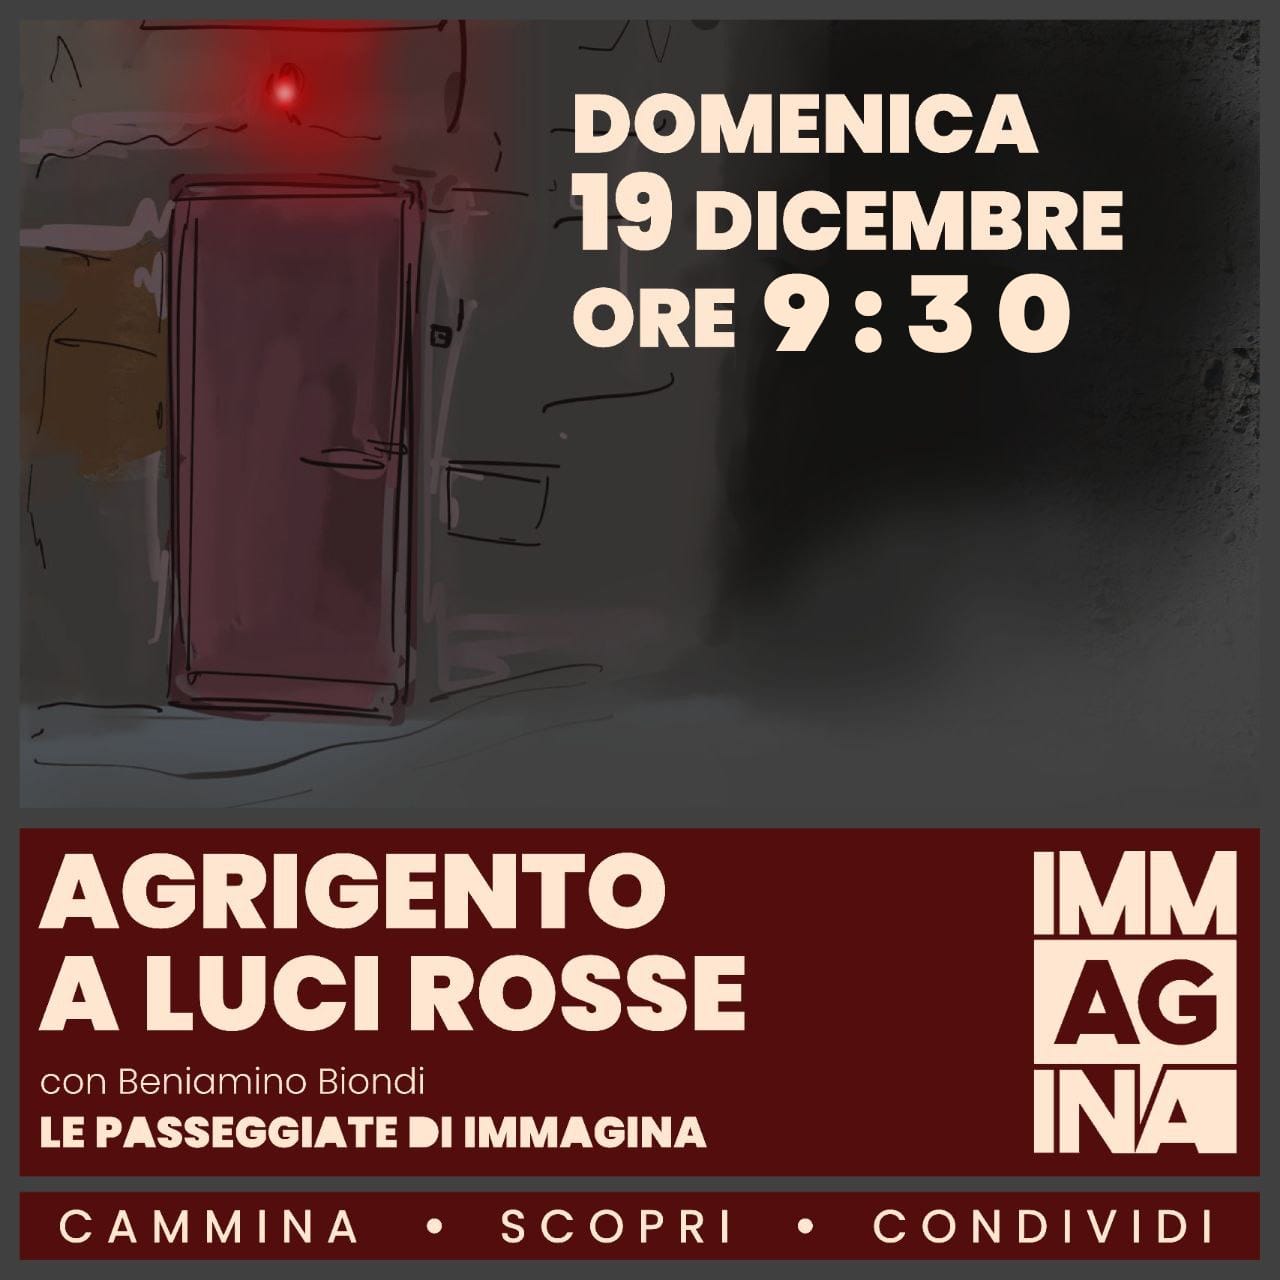 Agrigento a luci rosse